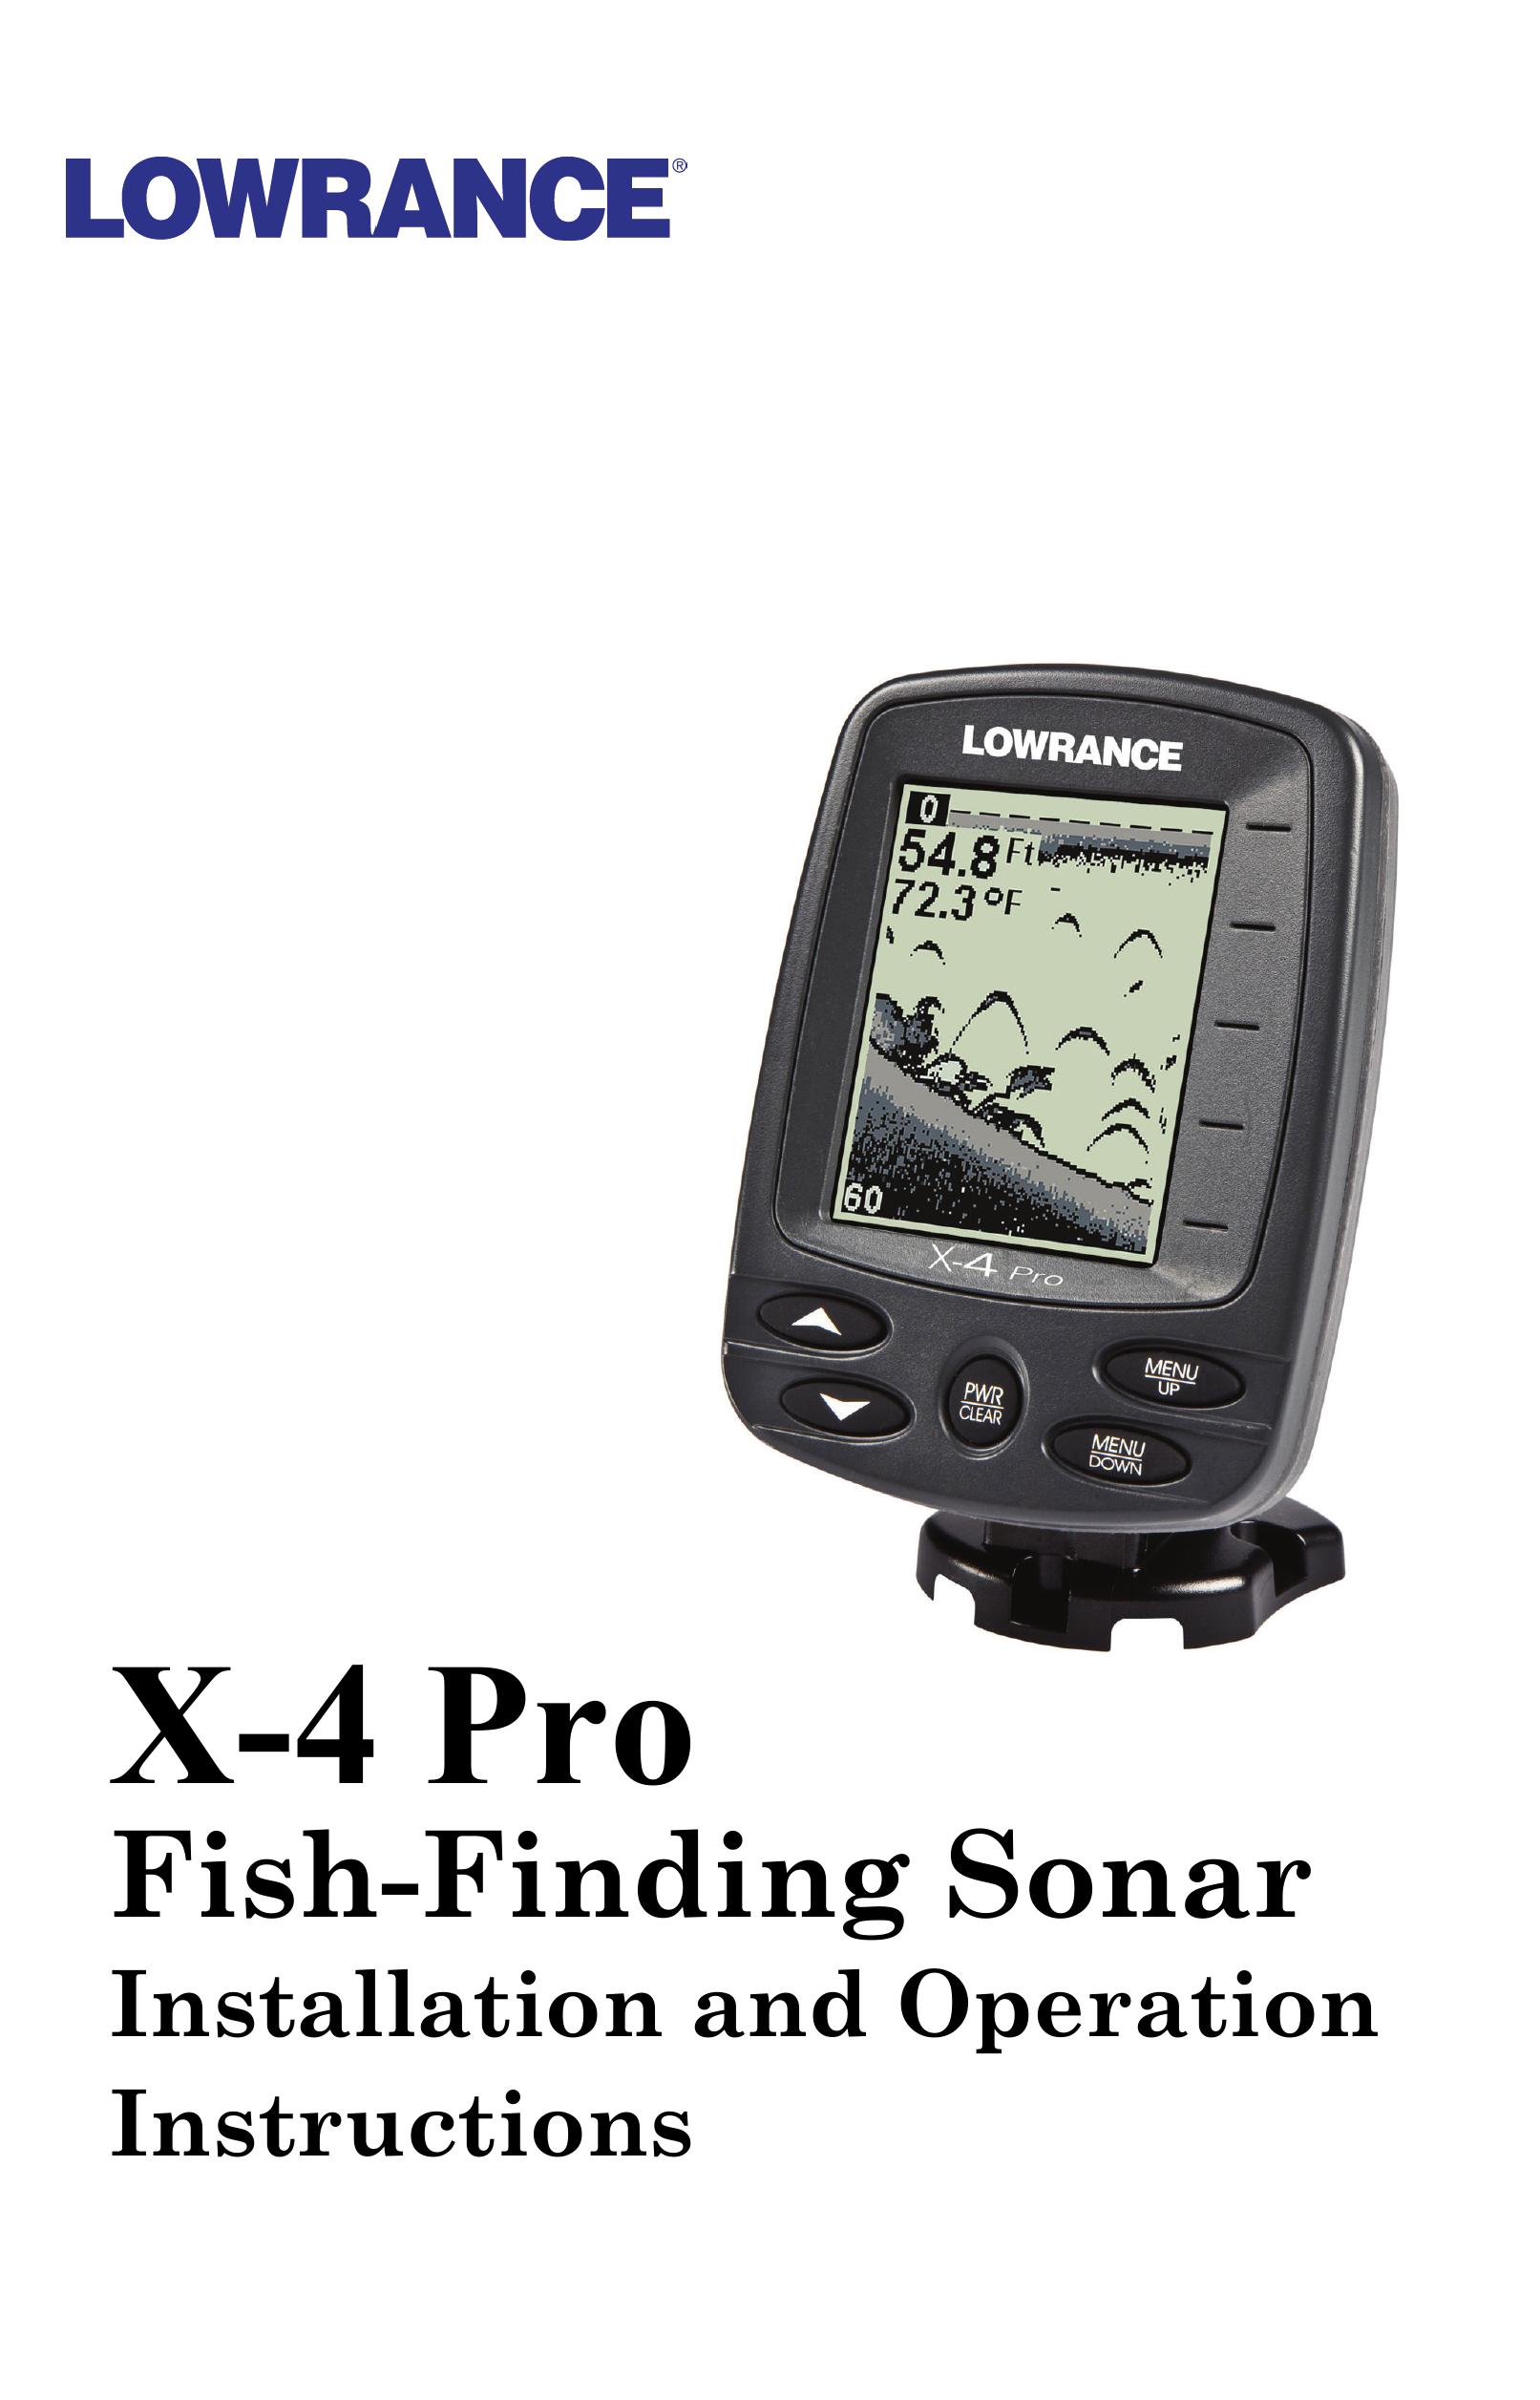 Lowrance electronic X-4 PRO Fish Finder User Manual